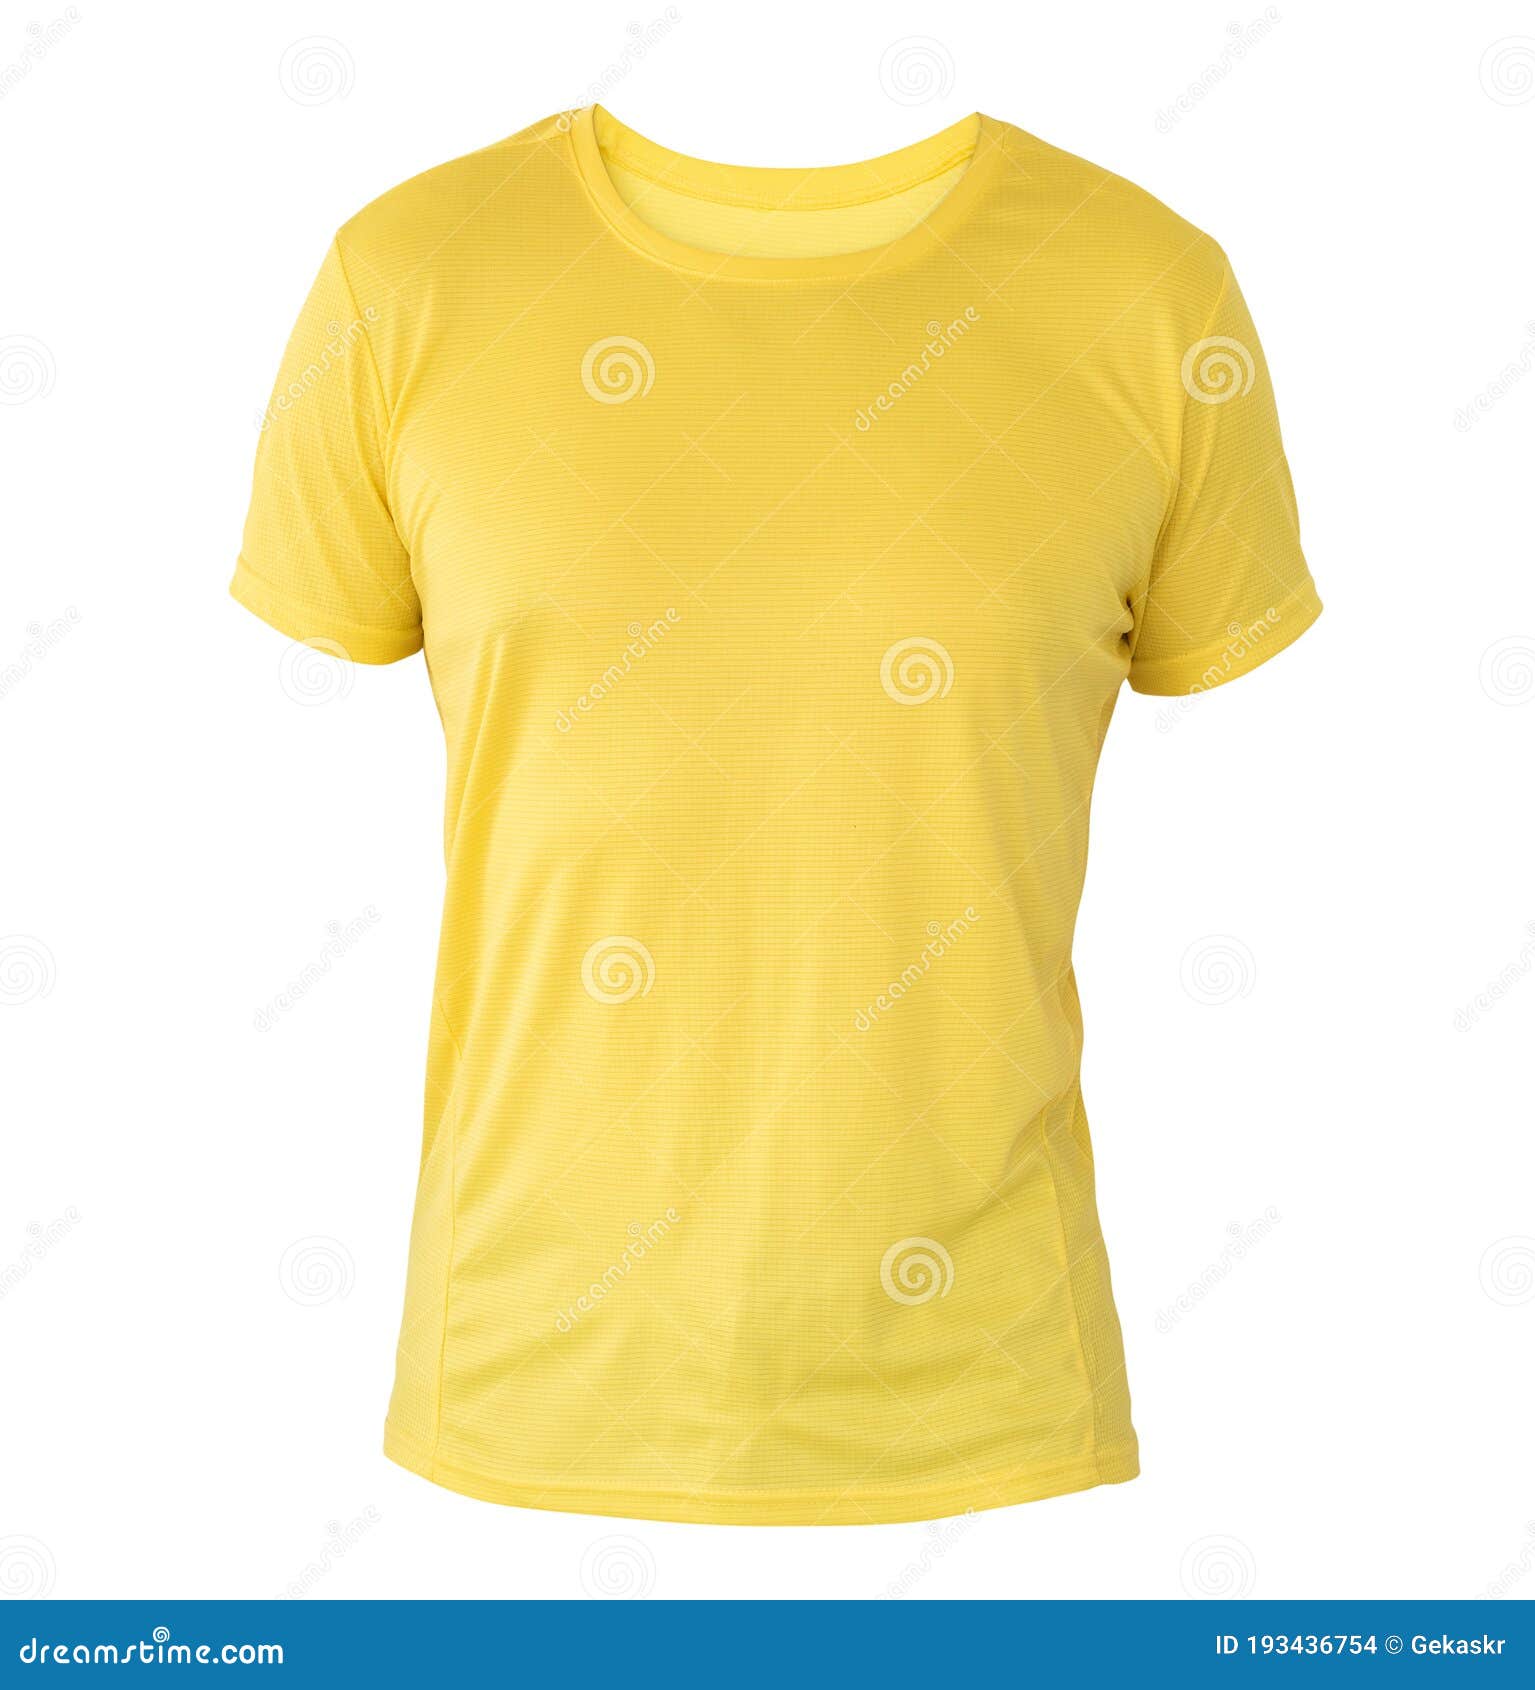 Download 1 188 Yellow T Shirt Template Photos Free Royalty Free Stock Photos From Dreamstime Yellowimages Mockups